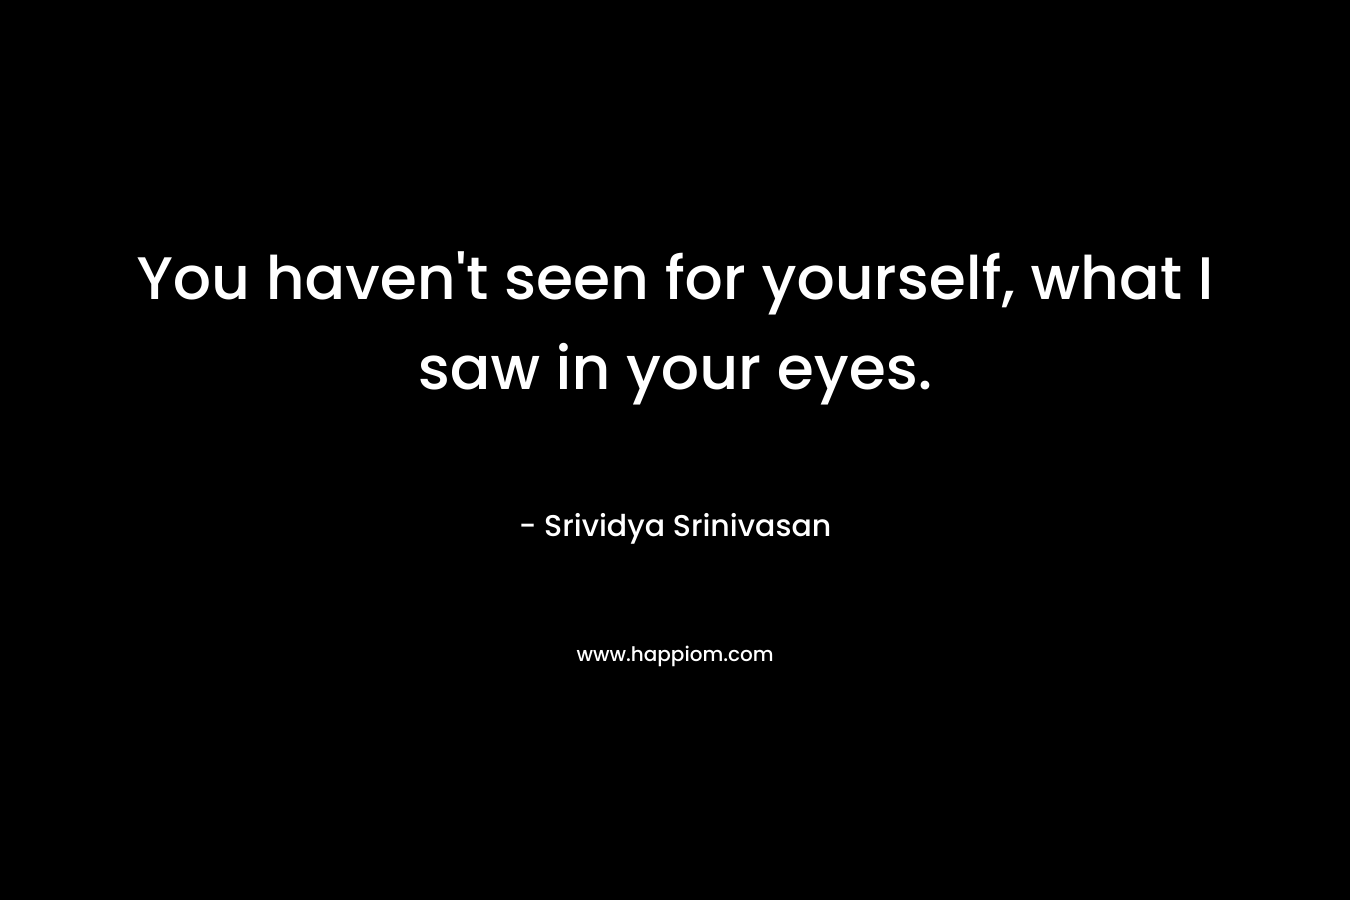 You haven’t seen for yourself, what I saw in your eyes. – Srividya Srinivasan